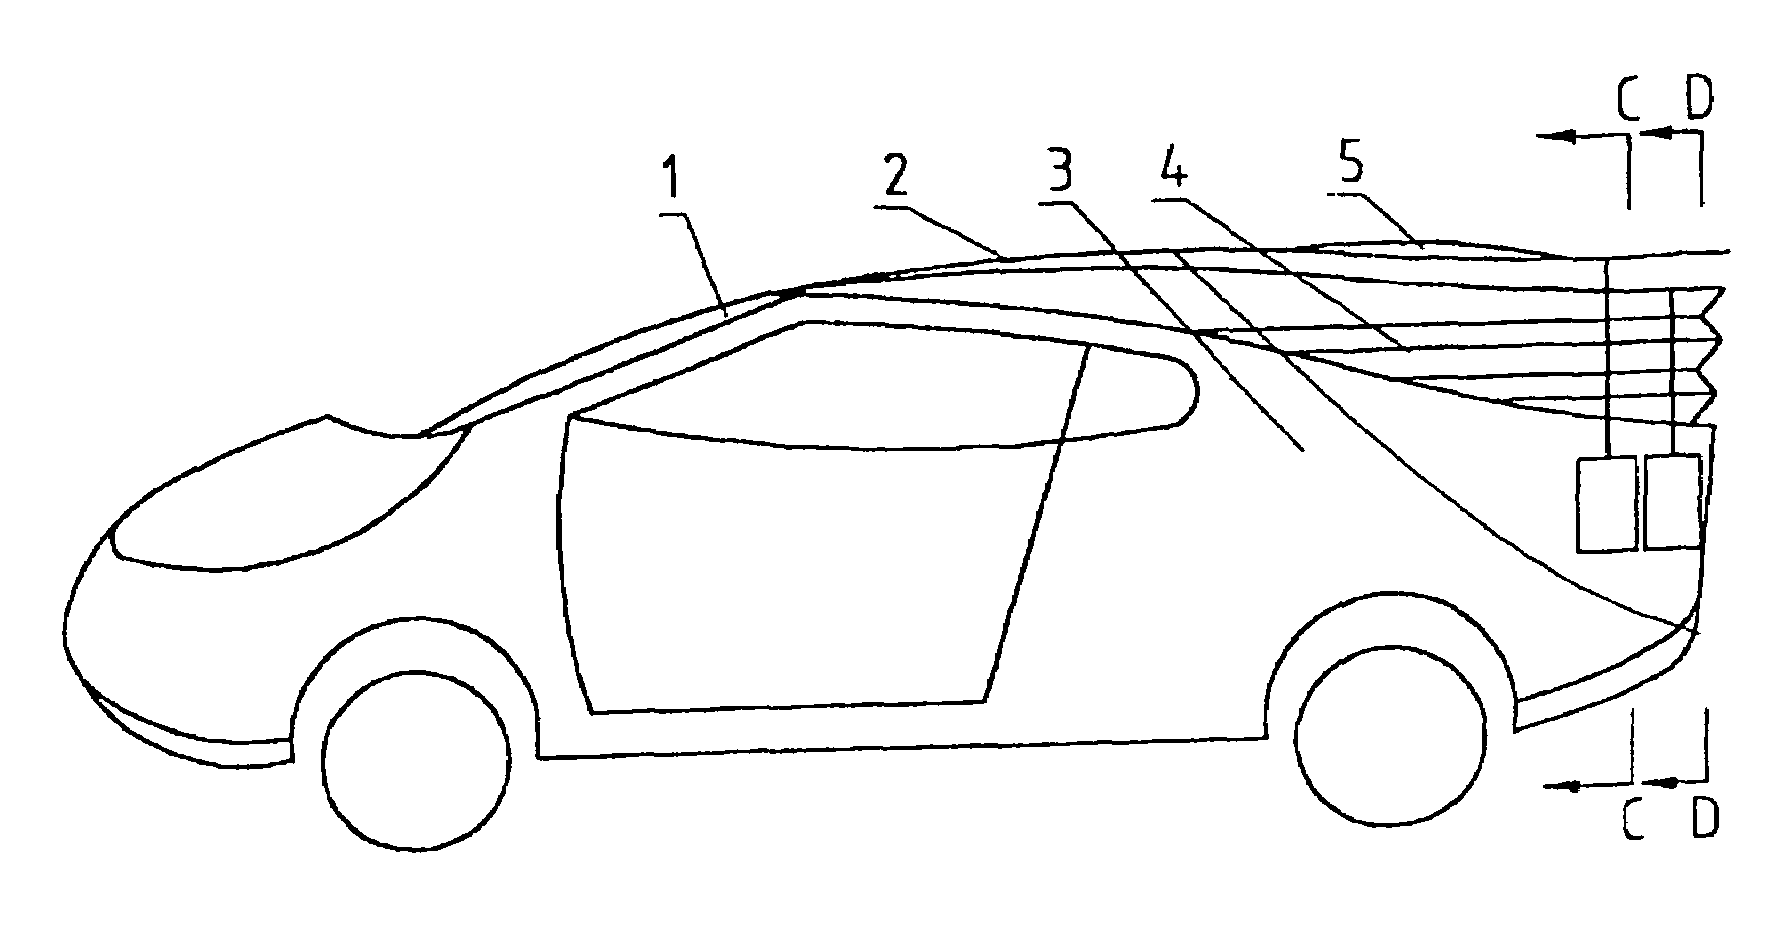 Roof cover plate for the cabin of a car